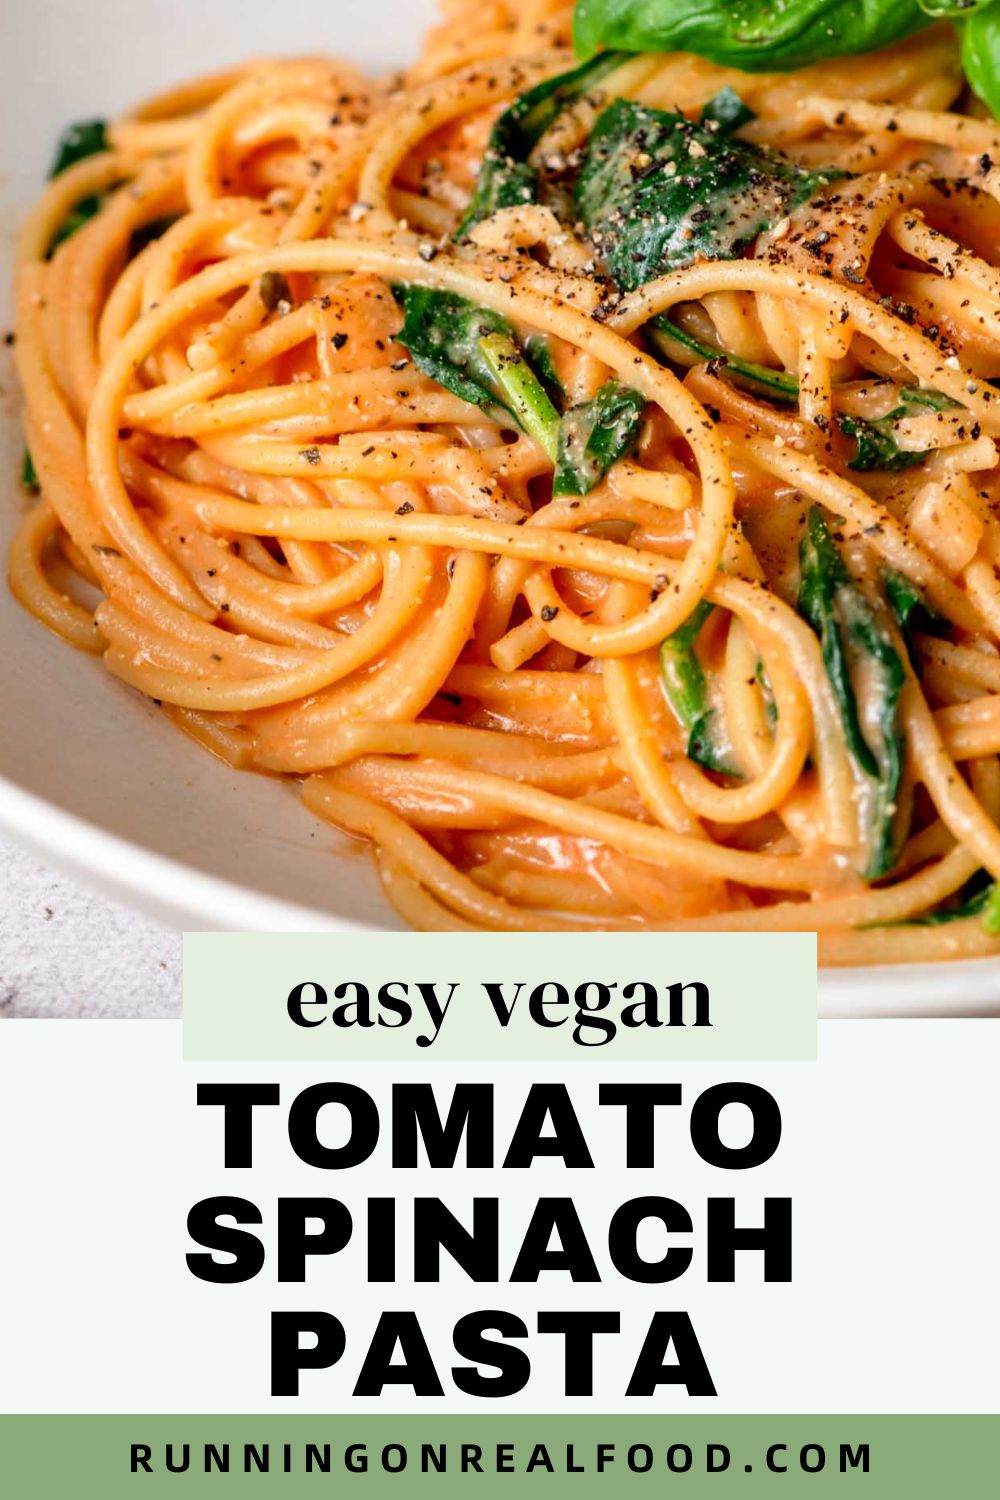 Graphic with stylized text title and an image of a tomato spinach pasta recipe.